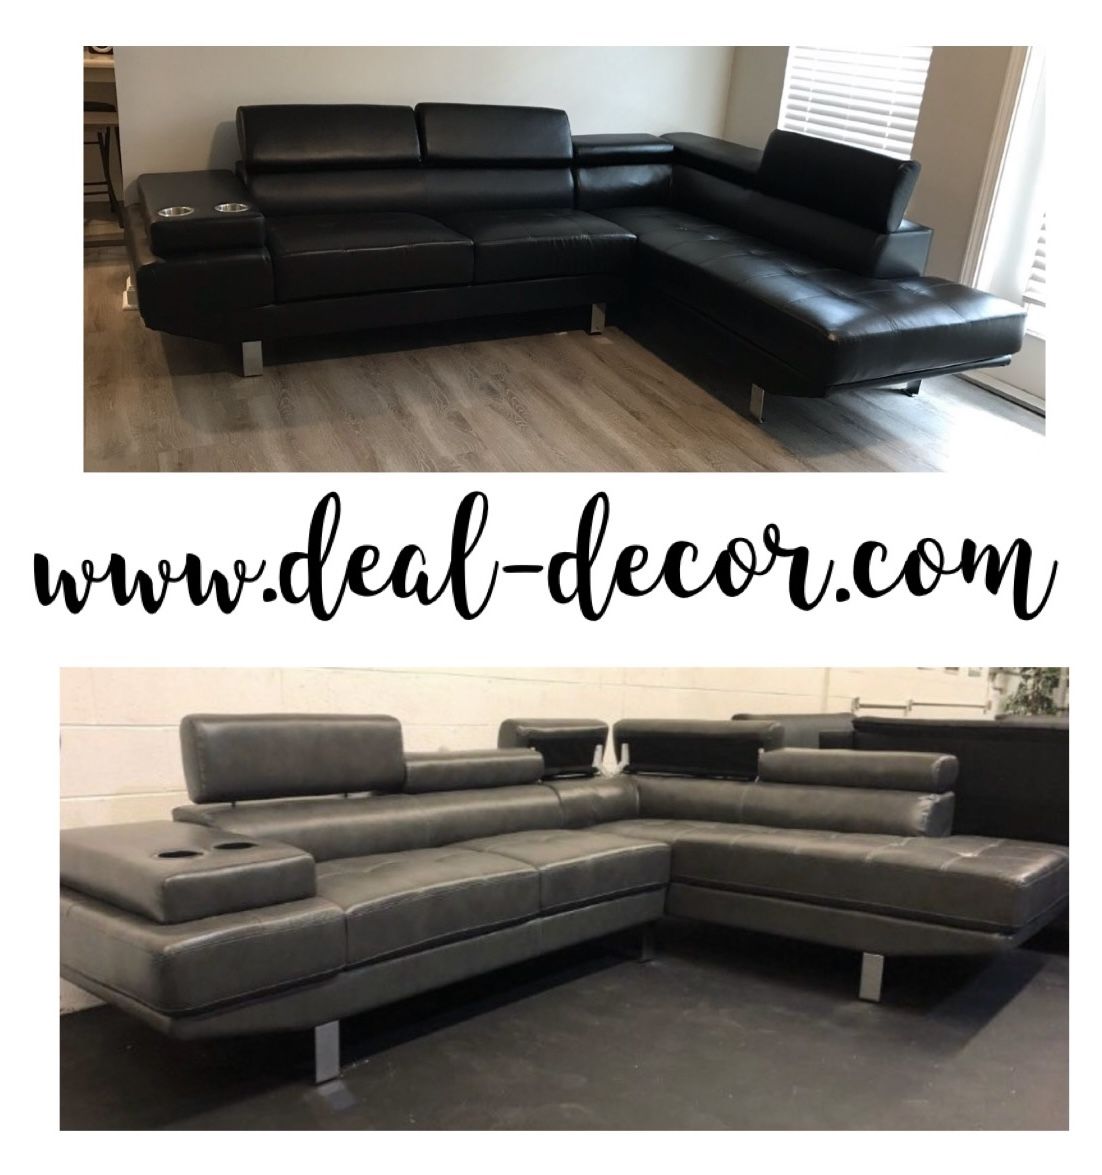 New Modern Adjustable Headrest Sectional Sofa With Storage Available In Black, Gray Or White